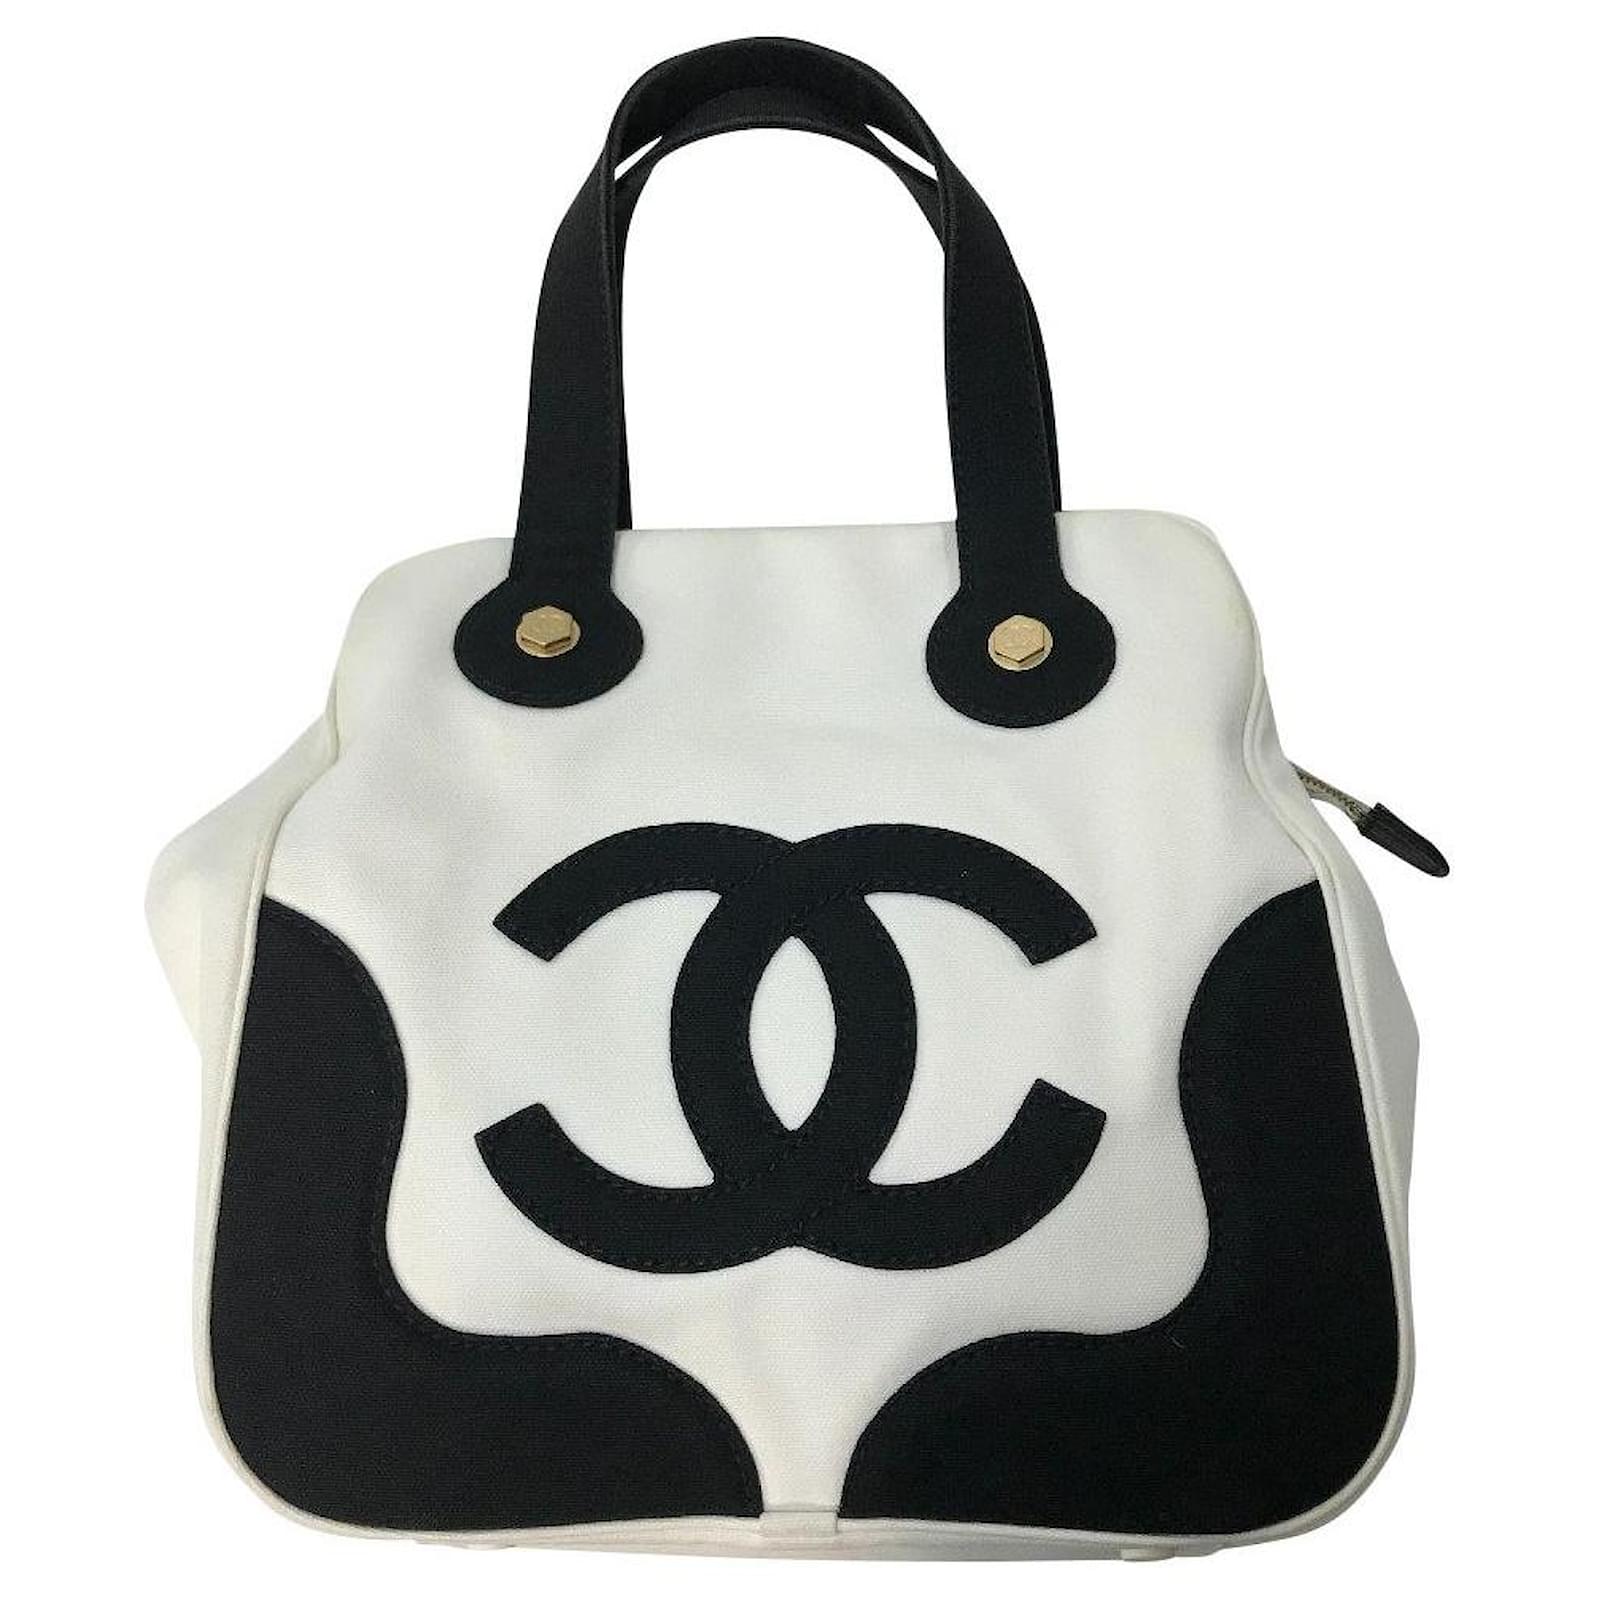 CHANEL, Bags, Chanel Large Cambon Tote White